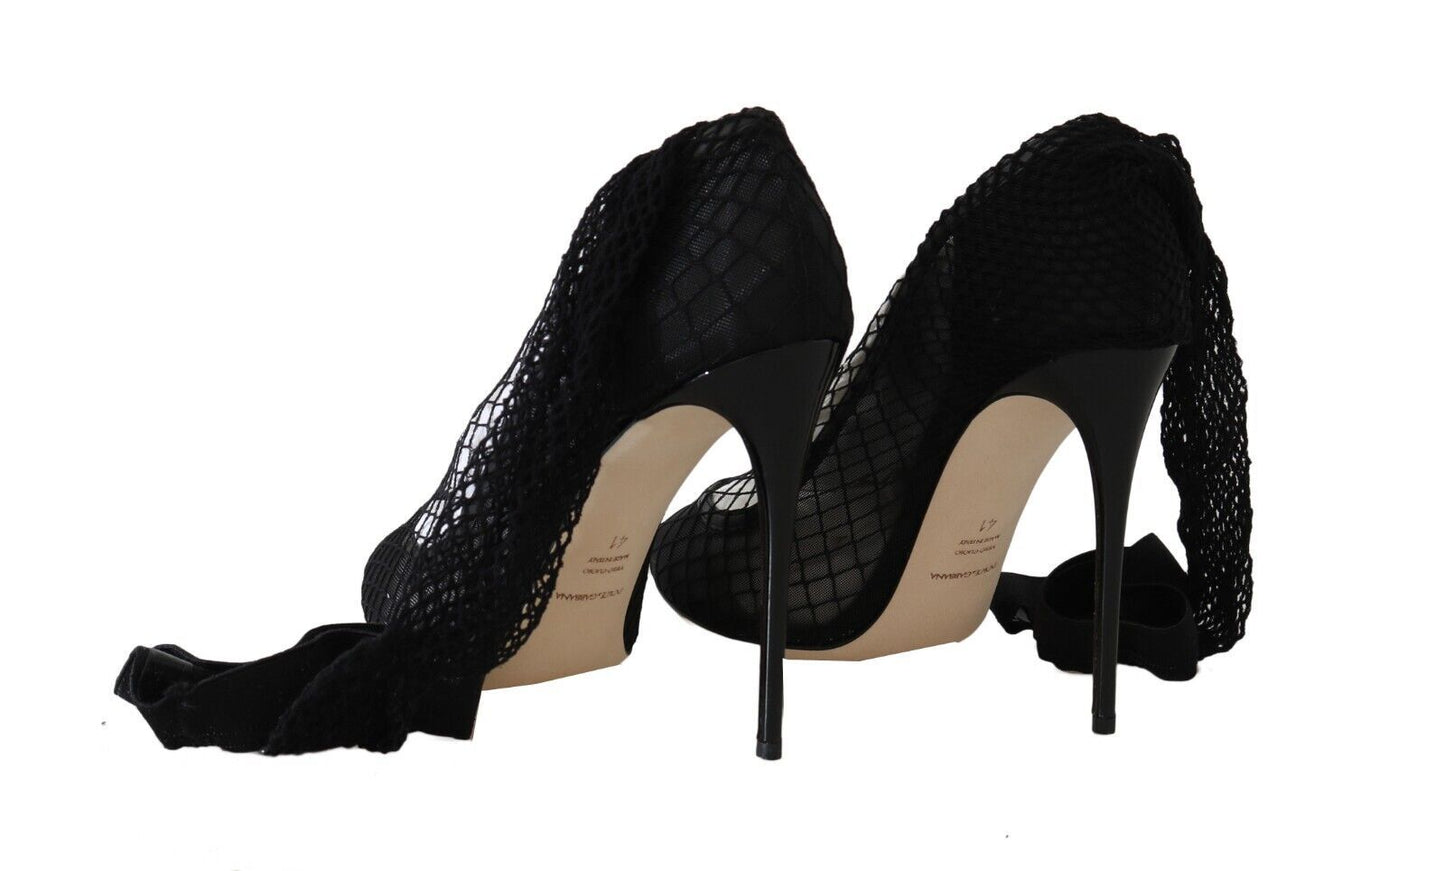 Dolce & Gabbana Black Netted talons talons pompes chaussures